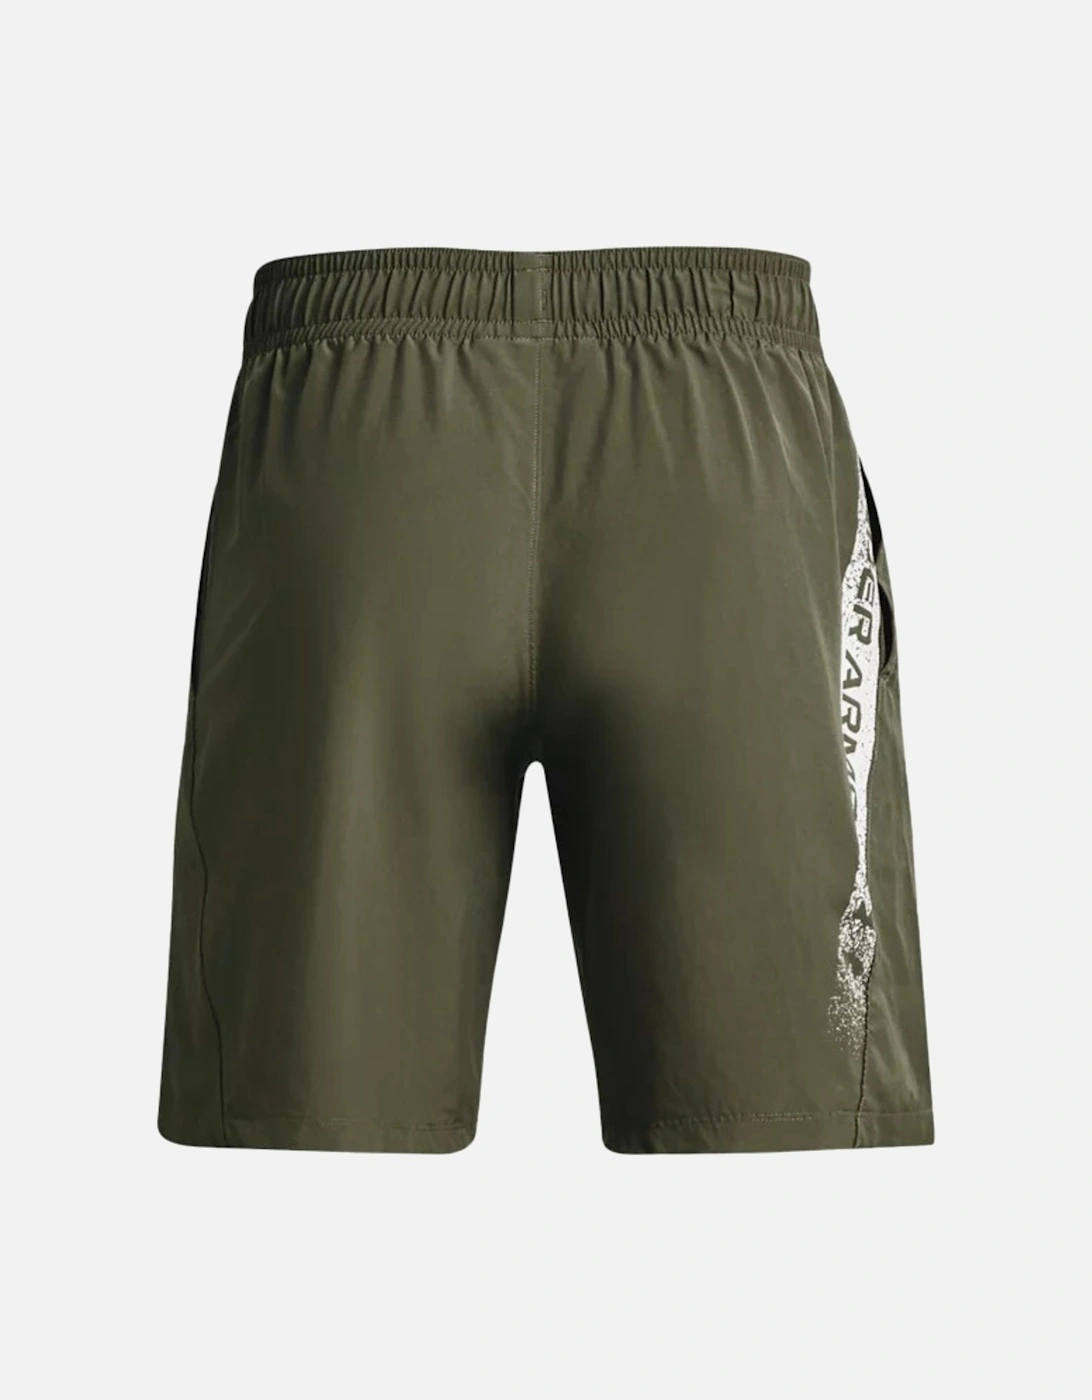 Mens Woven Graphic Shorts (Olive)